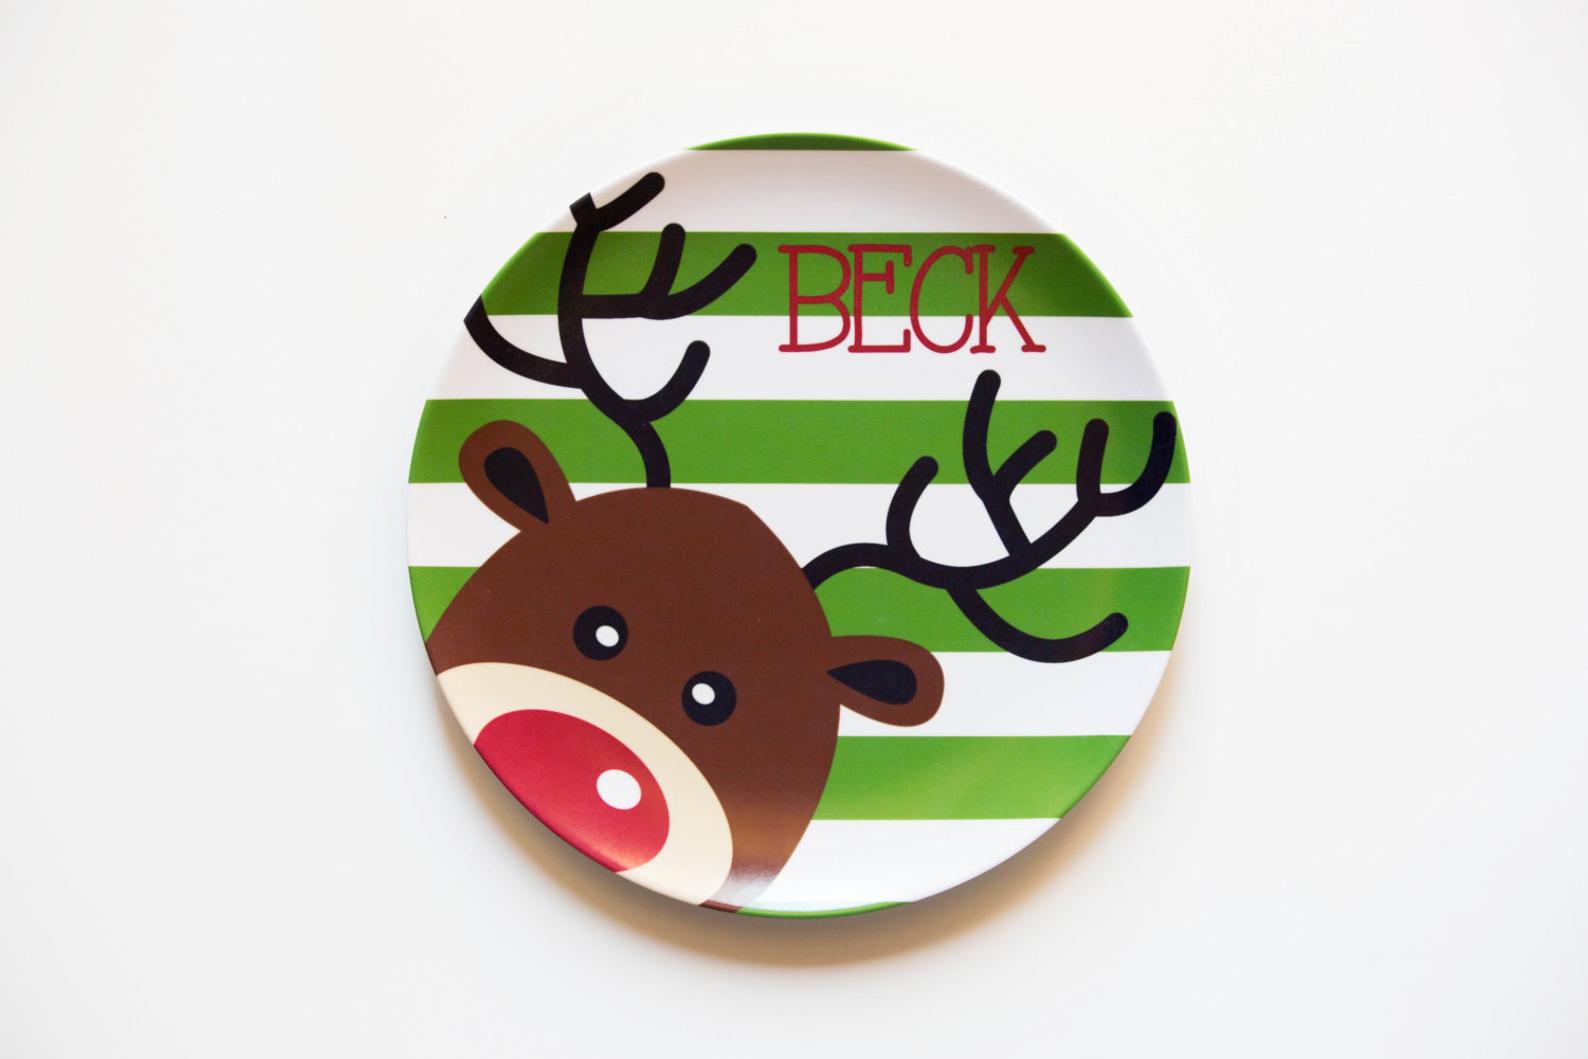 10 best baby and toddler holiday gifts from small businesses: Personalized holiday plate | Small Business Holiday Gift Guide 2020